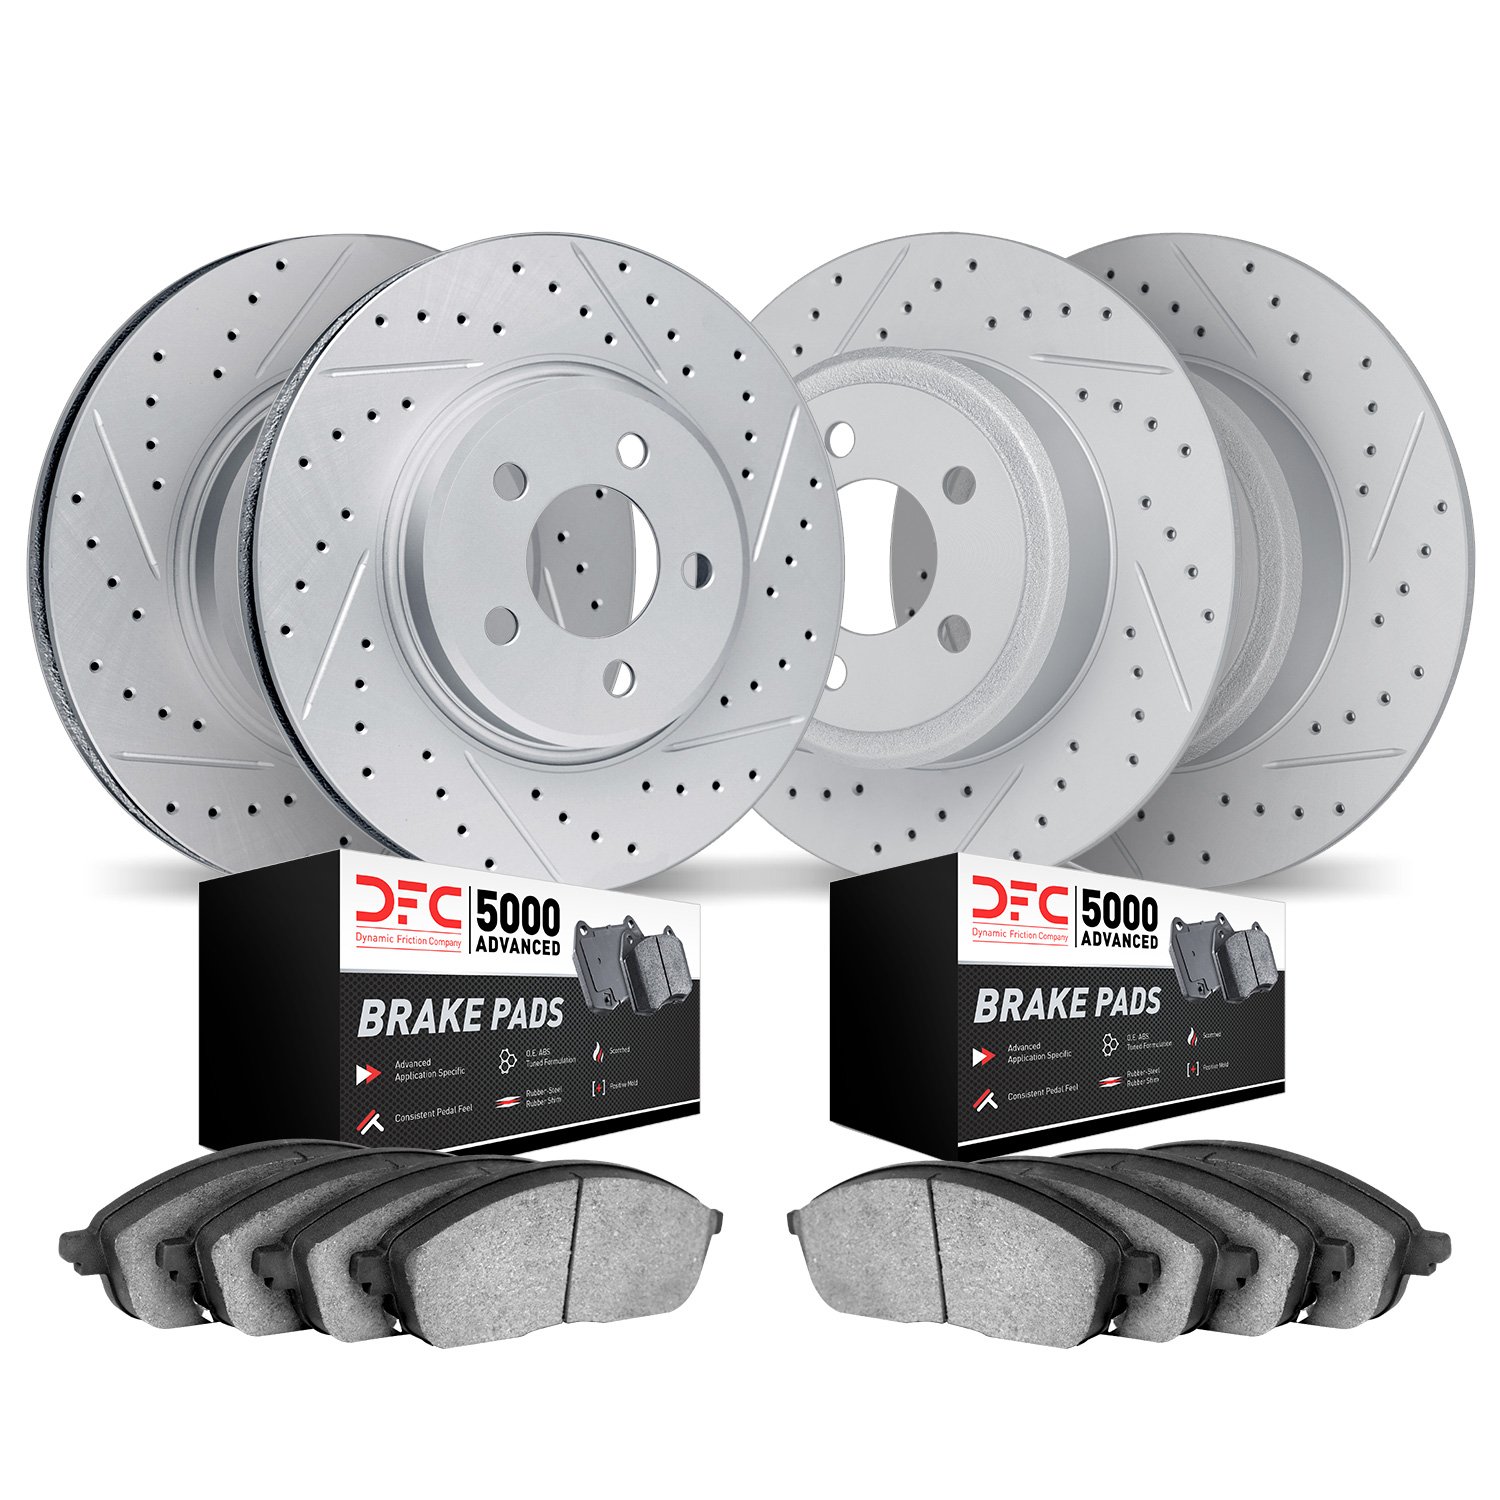 2504-39010 Geoperformance Drilled/Slotted Rotors w/5000 Advanced Brake Pads Kit, Fits Select Mopar, Position: Front and Rear